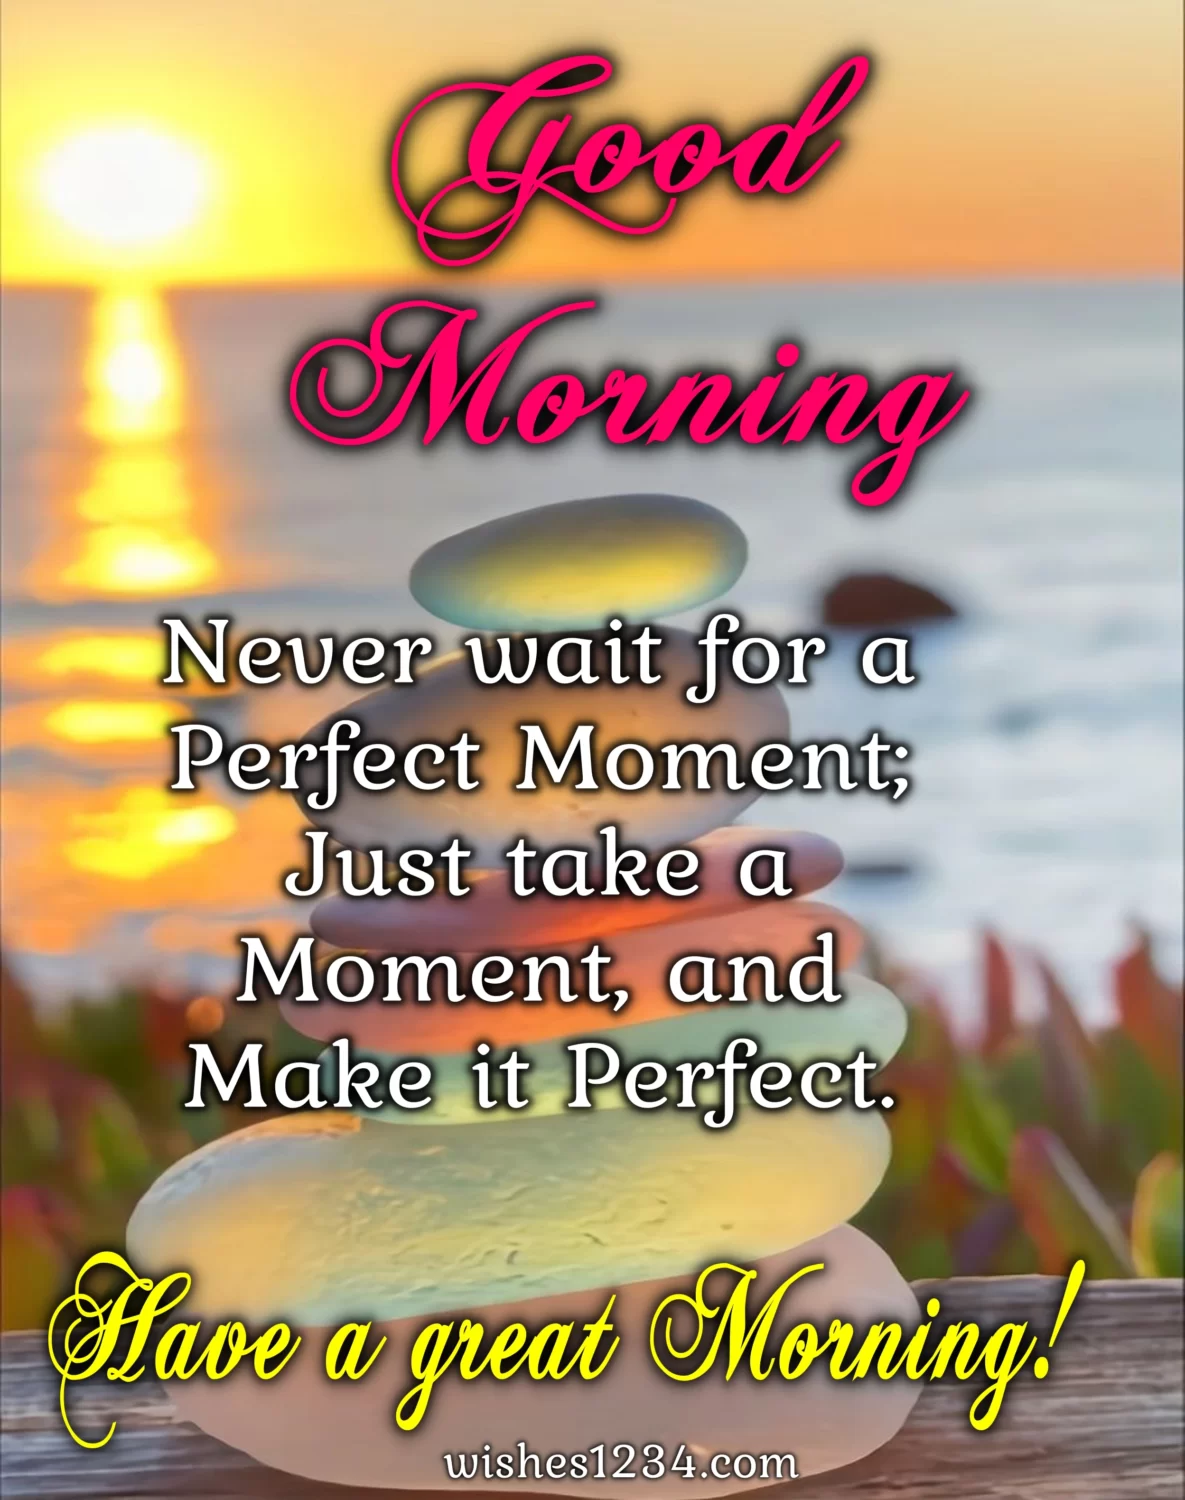 Good morning message with colorful, Morning Quotes.